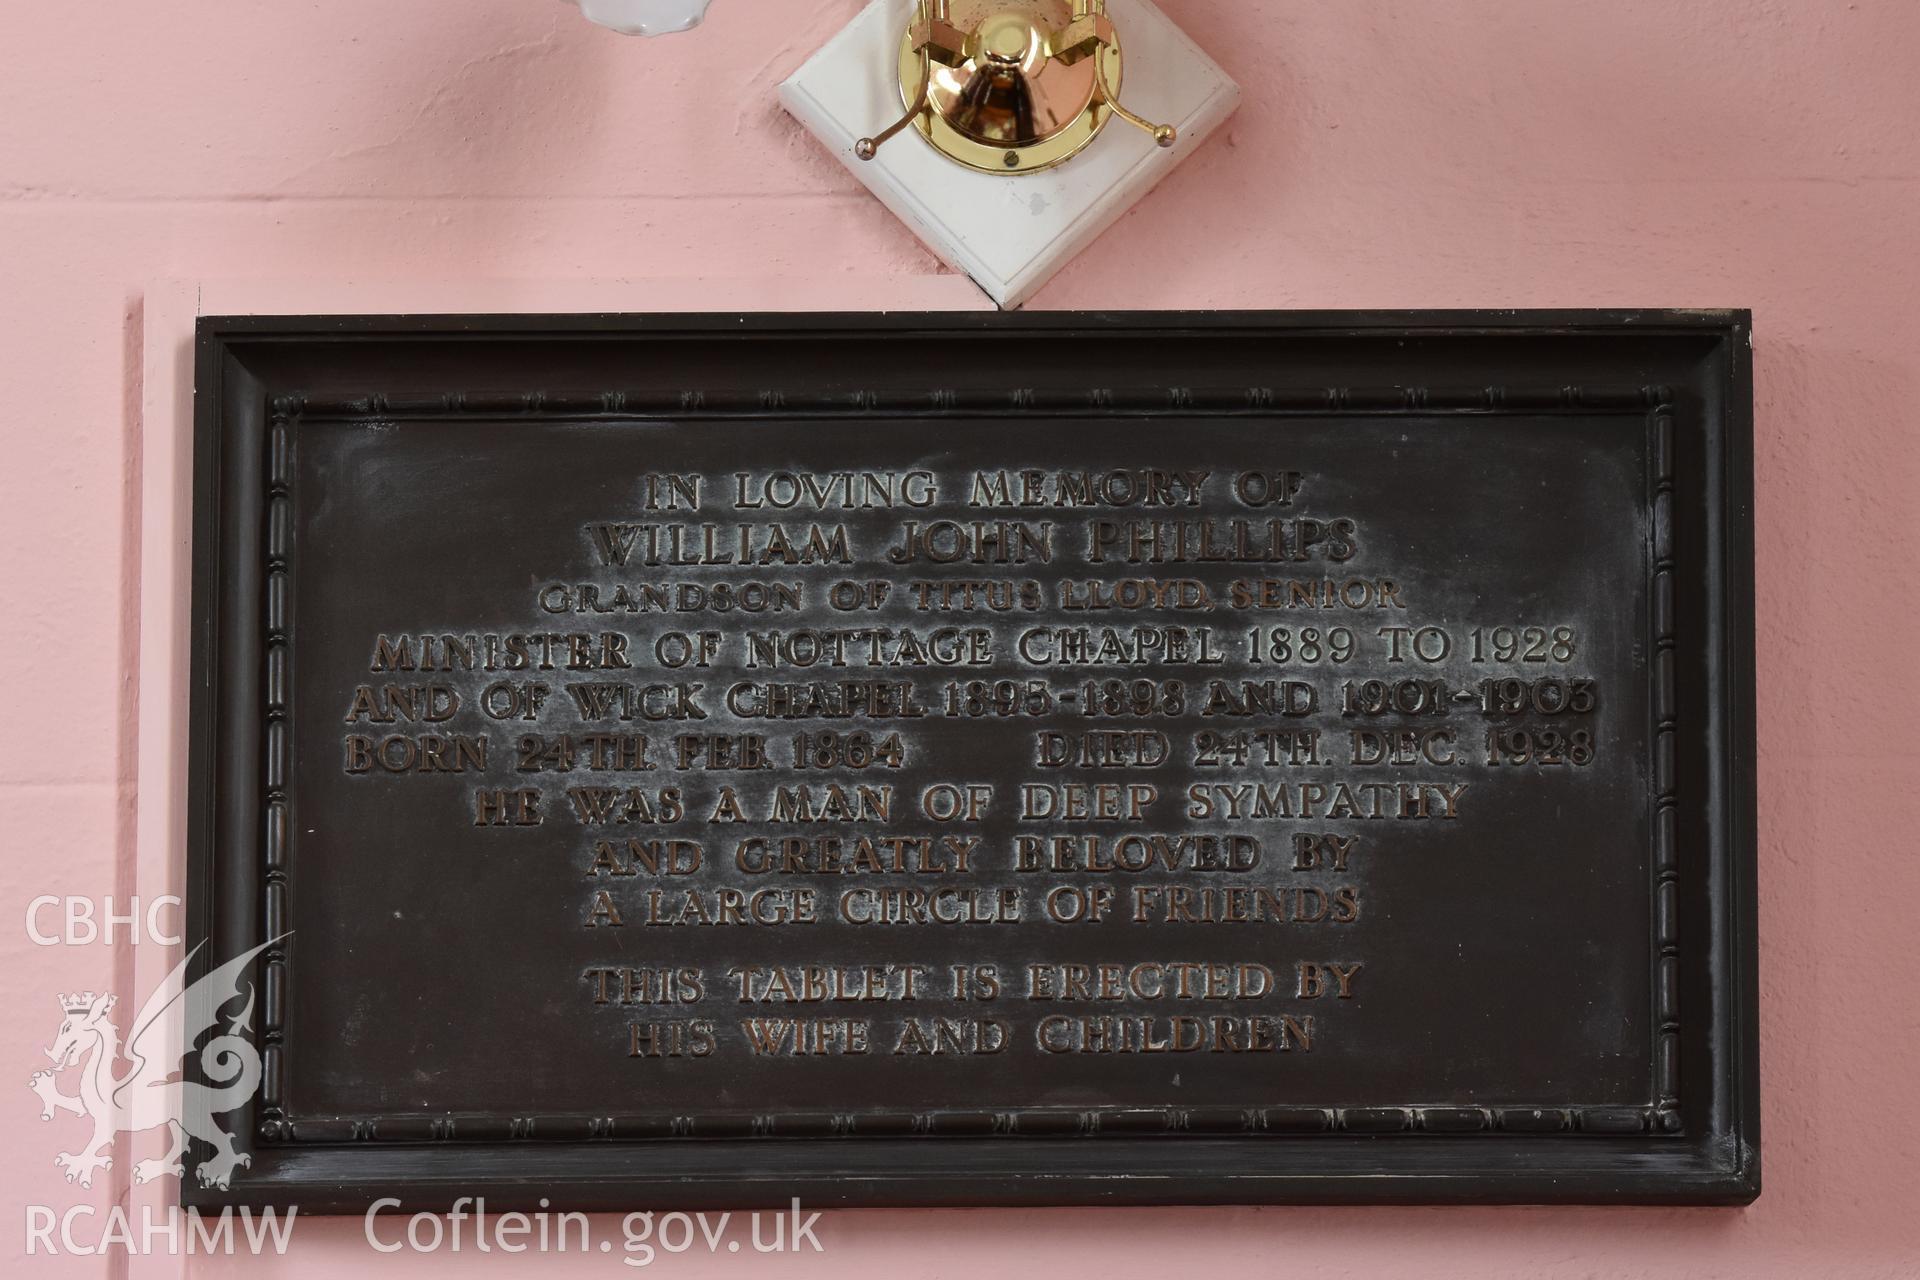 Colour photograph showing detail of memorial plaque dedicated to William John Phillips at the Baptist & Unitarian Chapel, Nottage, Porthcawl. Taken during photographic survey conducted by Sue Fielding on 12th May 2018.